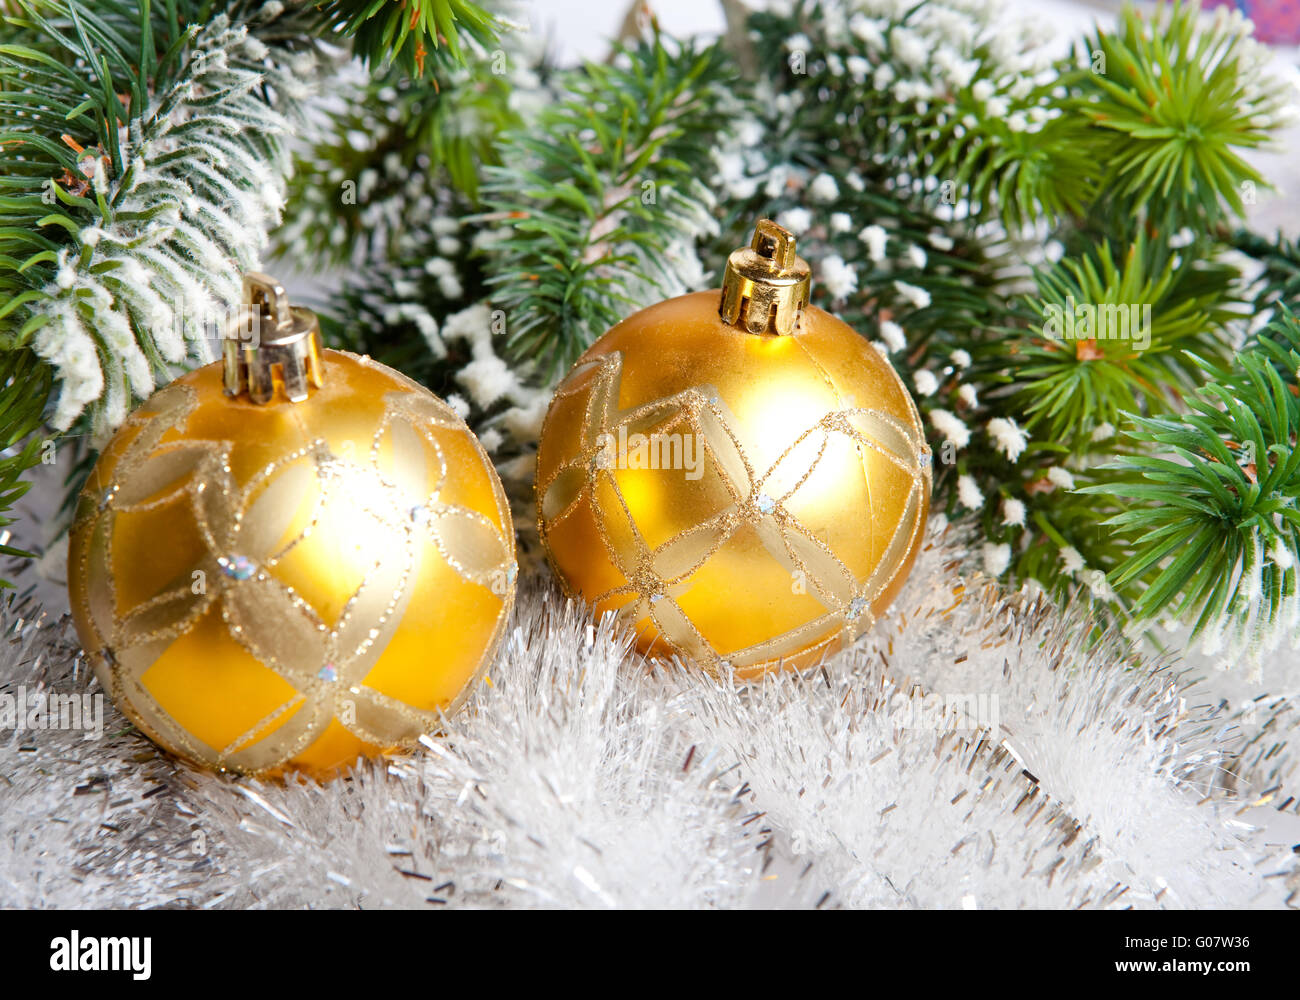 Two yellow New Year's balls and snow-covered branc Stock Photo